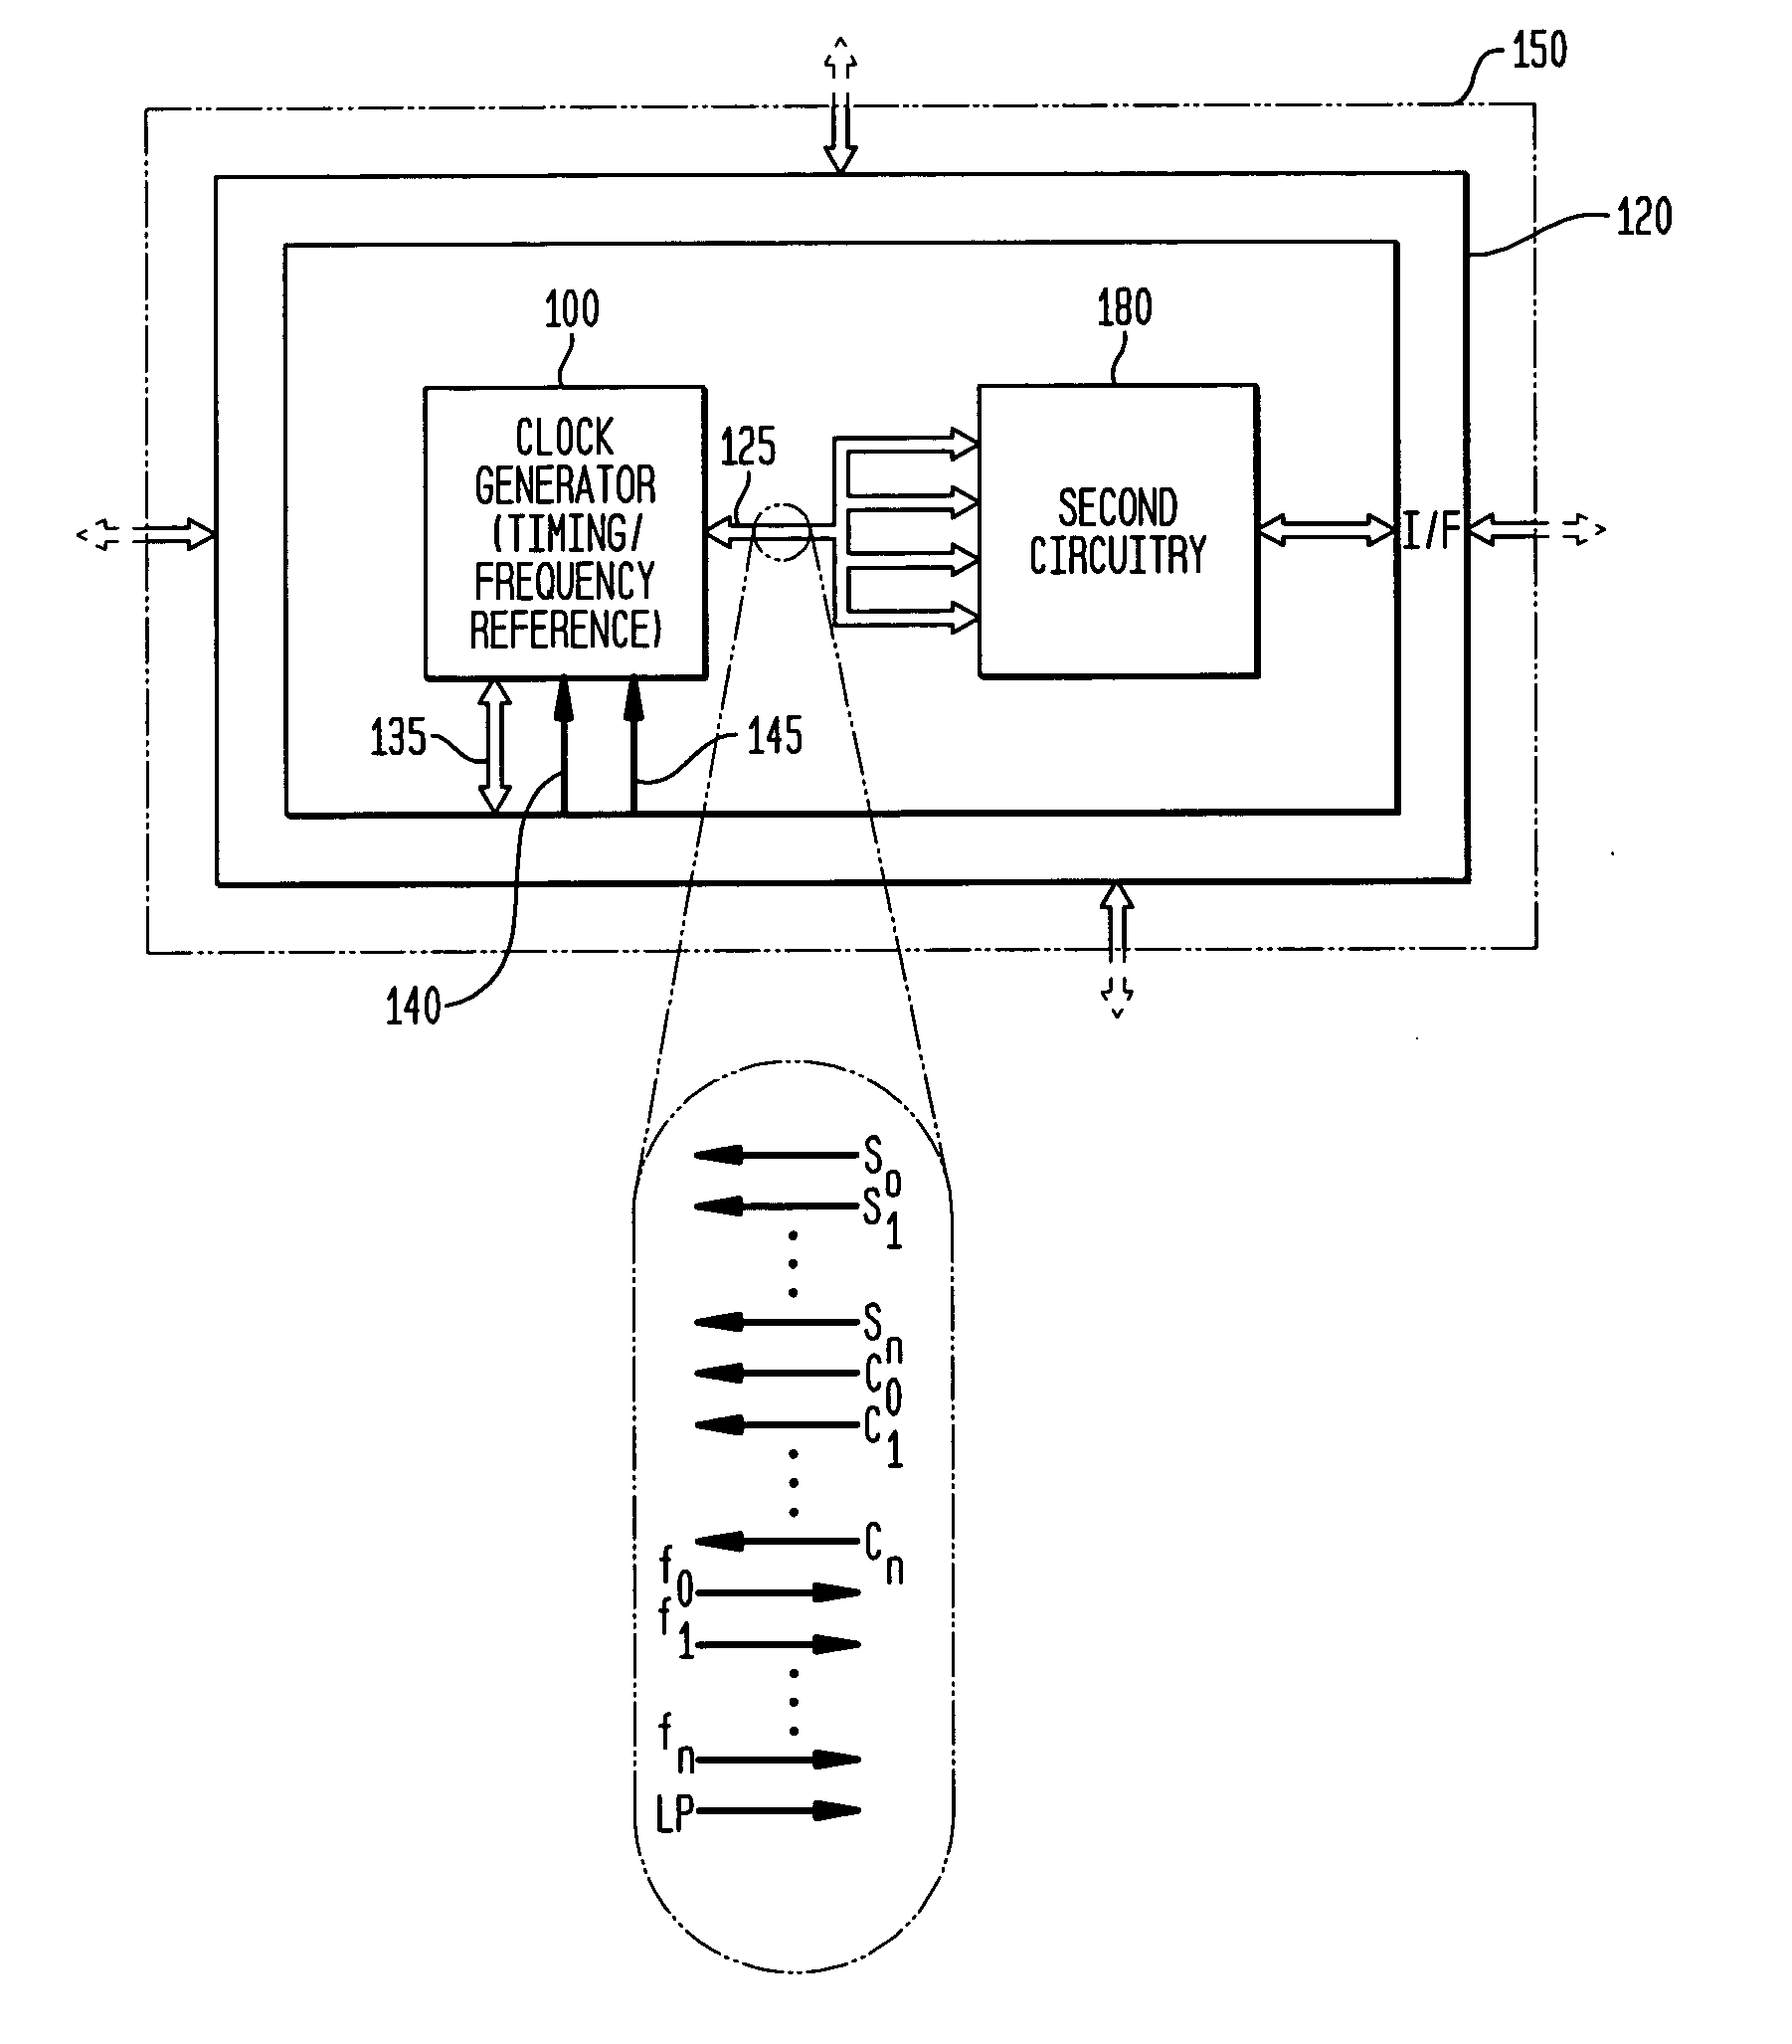 Frequency calibration for a monolithic clock generator and timing/frequency reference